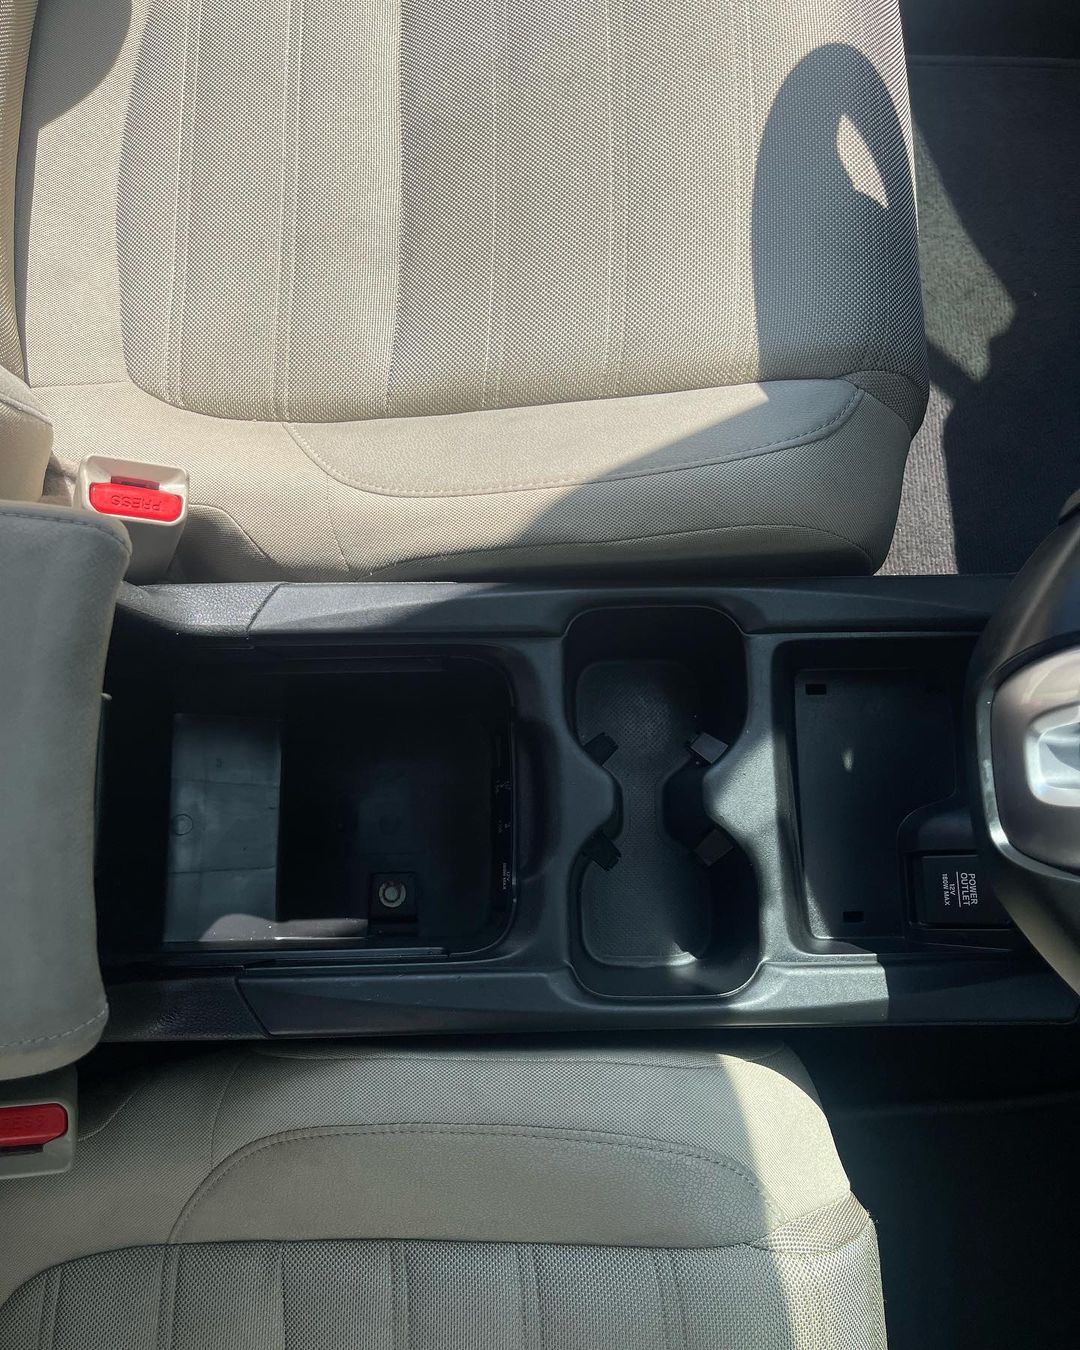 crv cupholders after interior detail